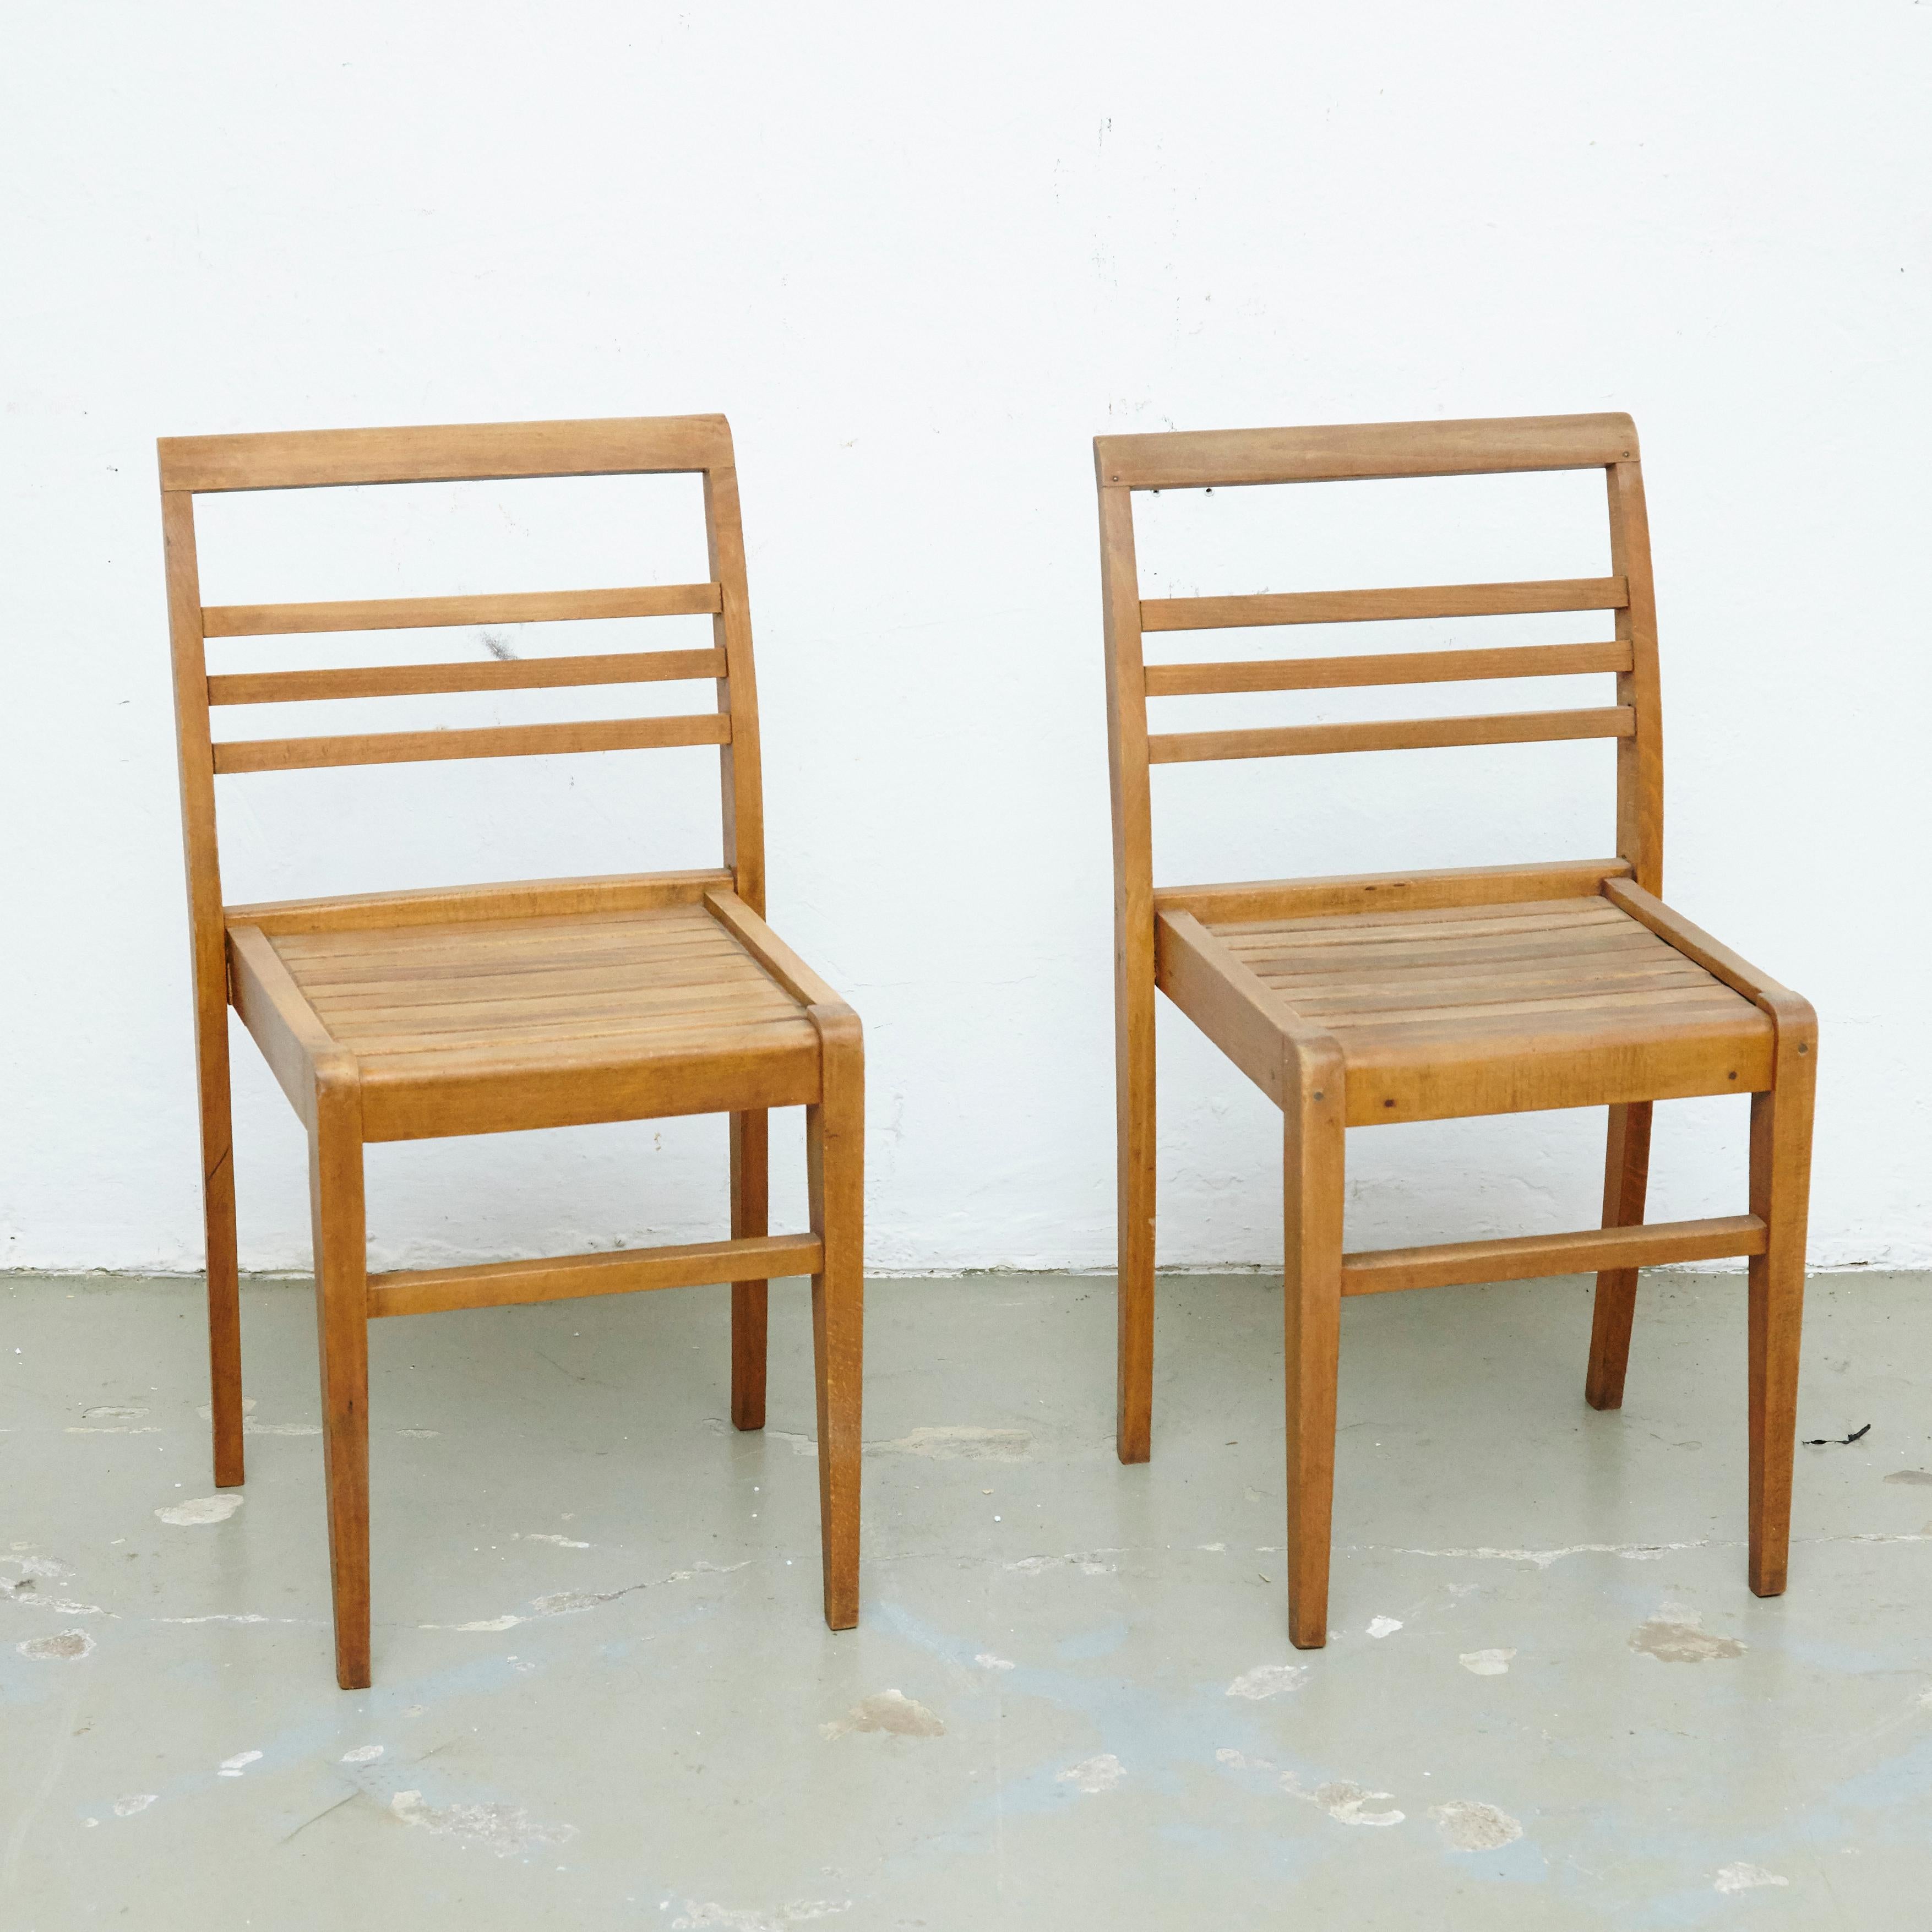 Chairs designed by Rene Gabriel, circa 1946.
Manufactured in France, circa 1946.
Oak wood base and structure.

In good original condition, with minor wear consistent with age and use, preserving a beautiful patina.

René Gabriel (1890–1950)